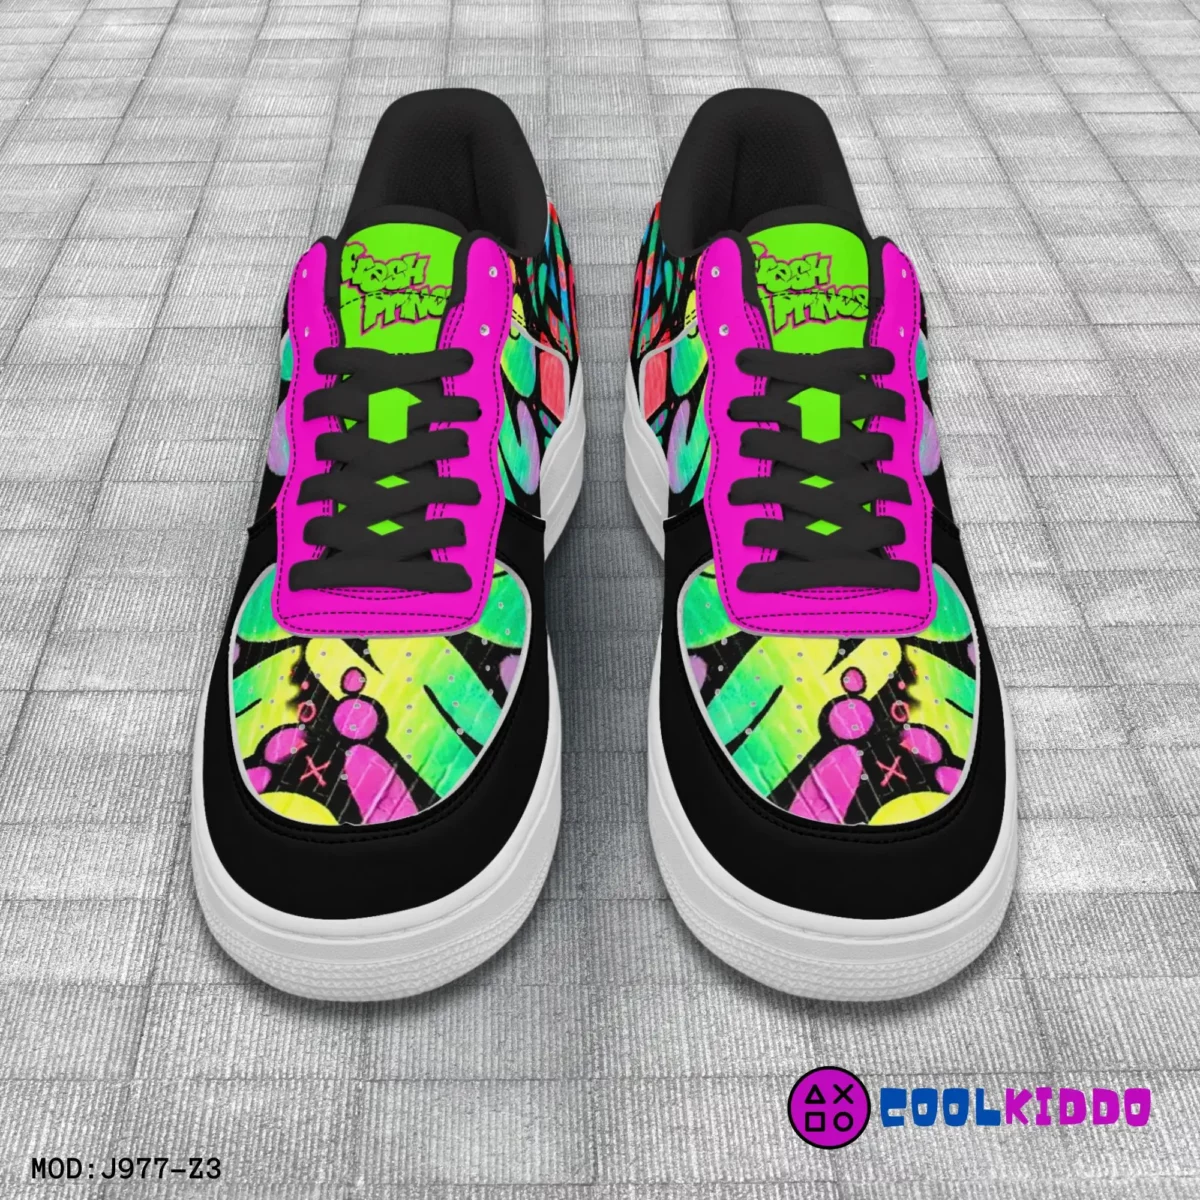 Custom Fresh Prince of Bel-Air AF1 Low-Top Leather Sneakers, Casual Shoes for any season. 90’s TV Show Inspired Cool Kiddo 18